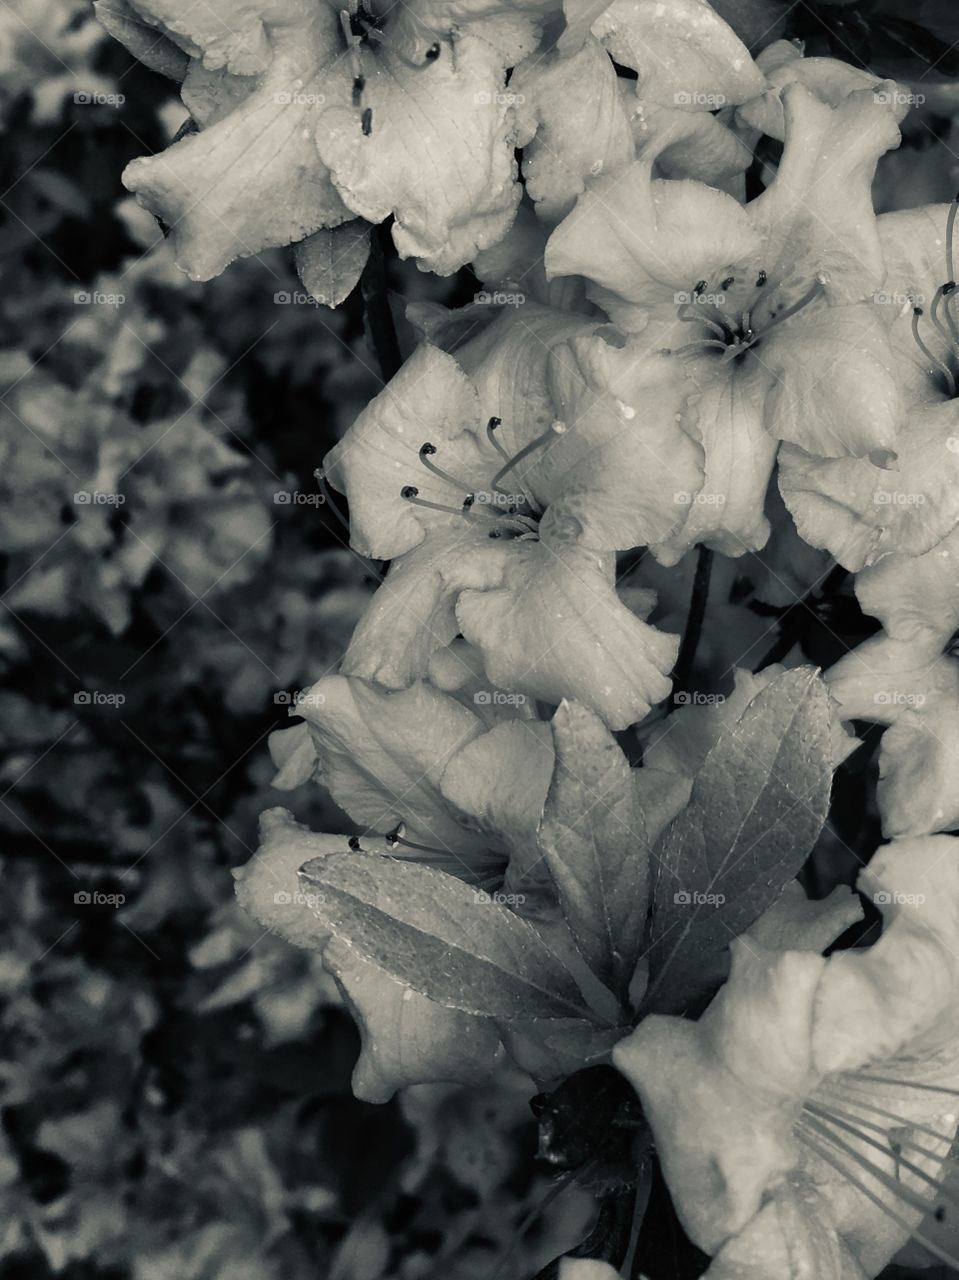 Flowers in black and white 